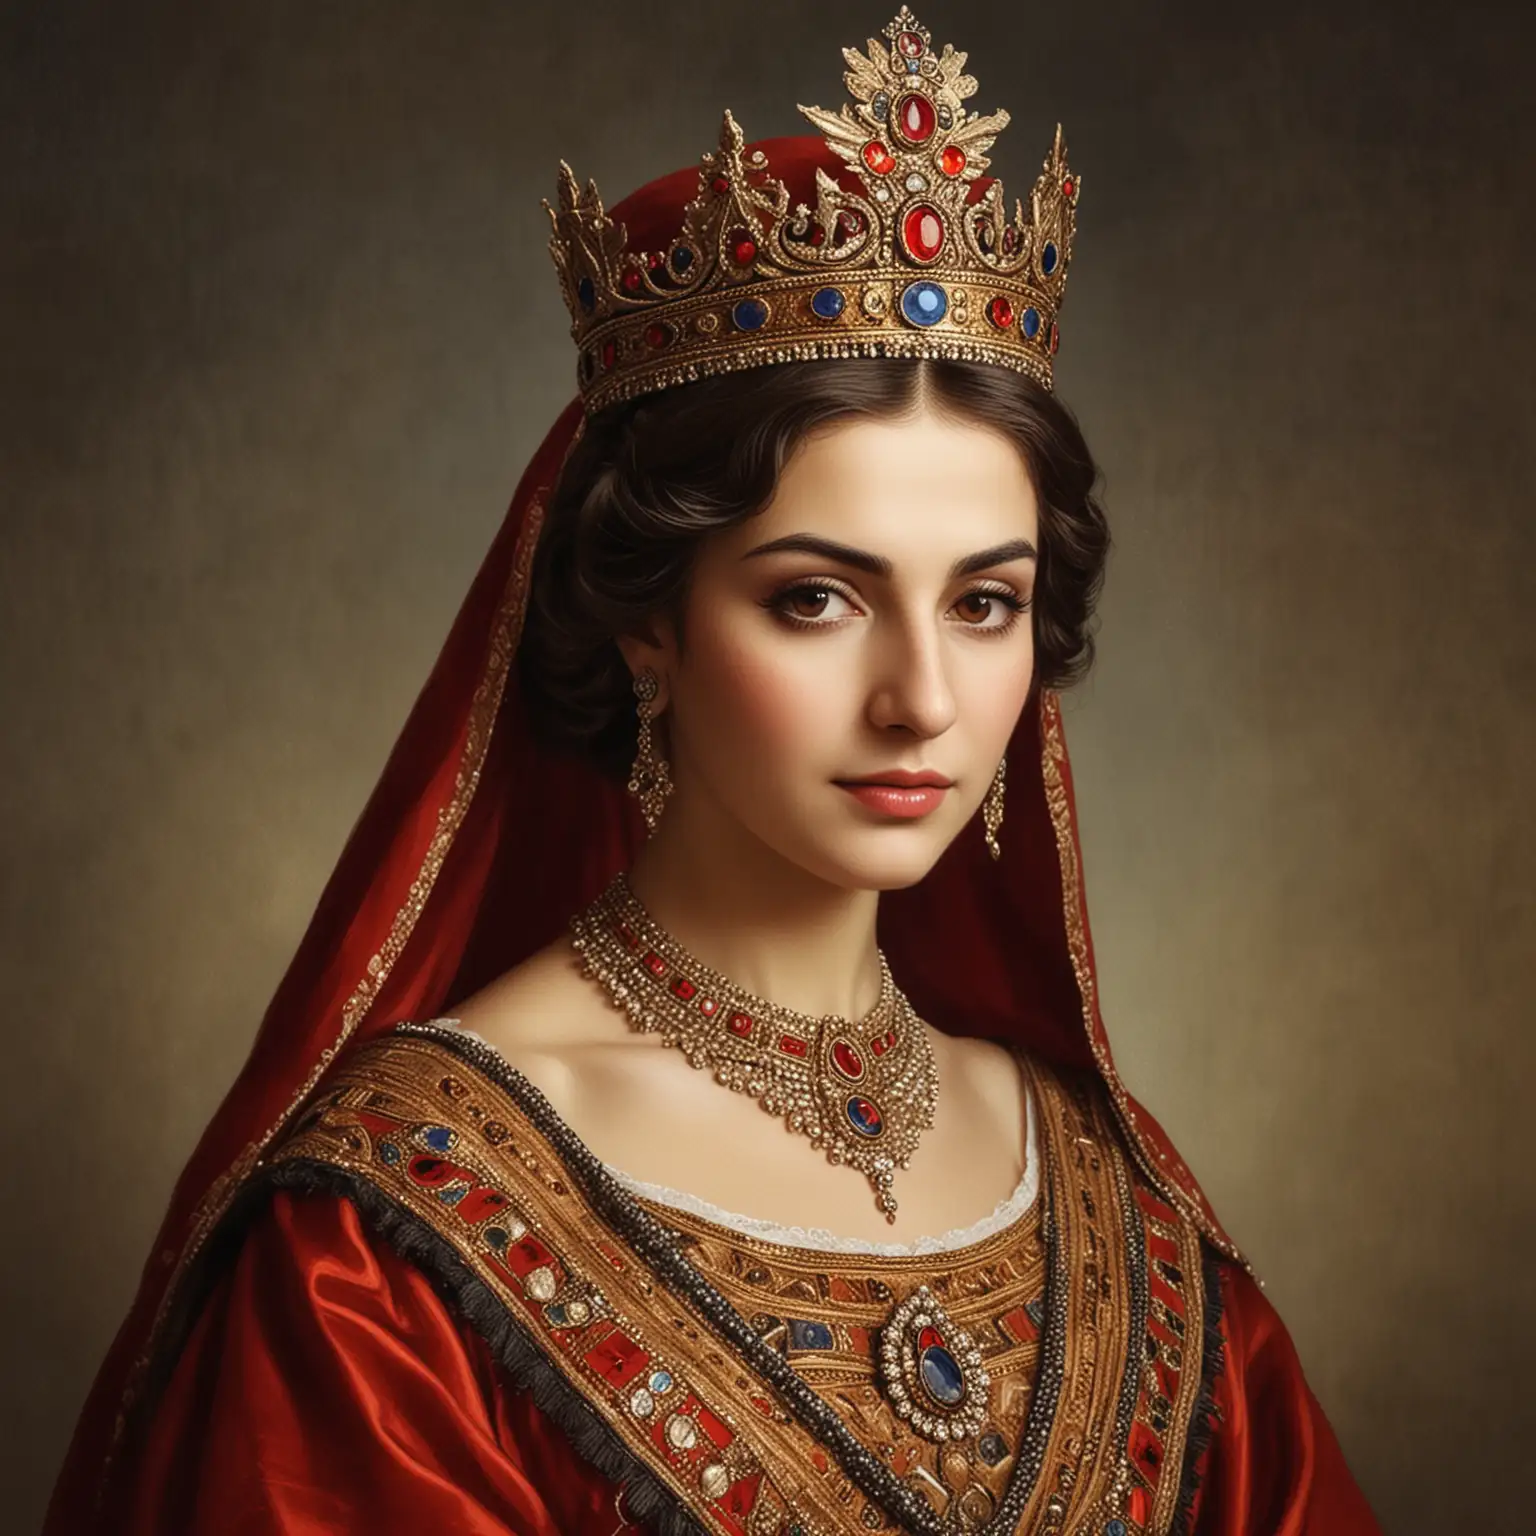 Anahit Queen of Armenia Regal Portrait of a Historical Figure